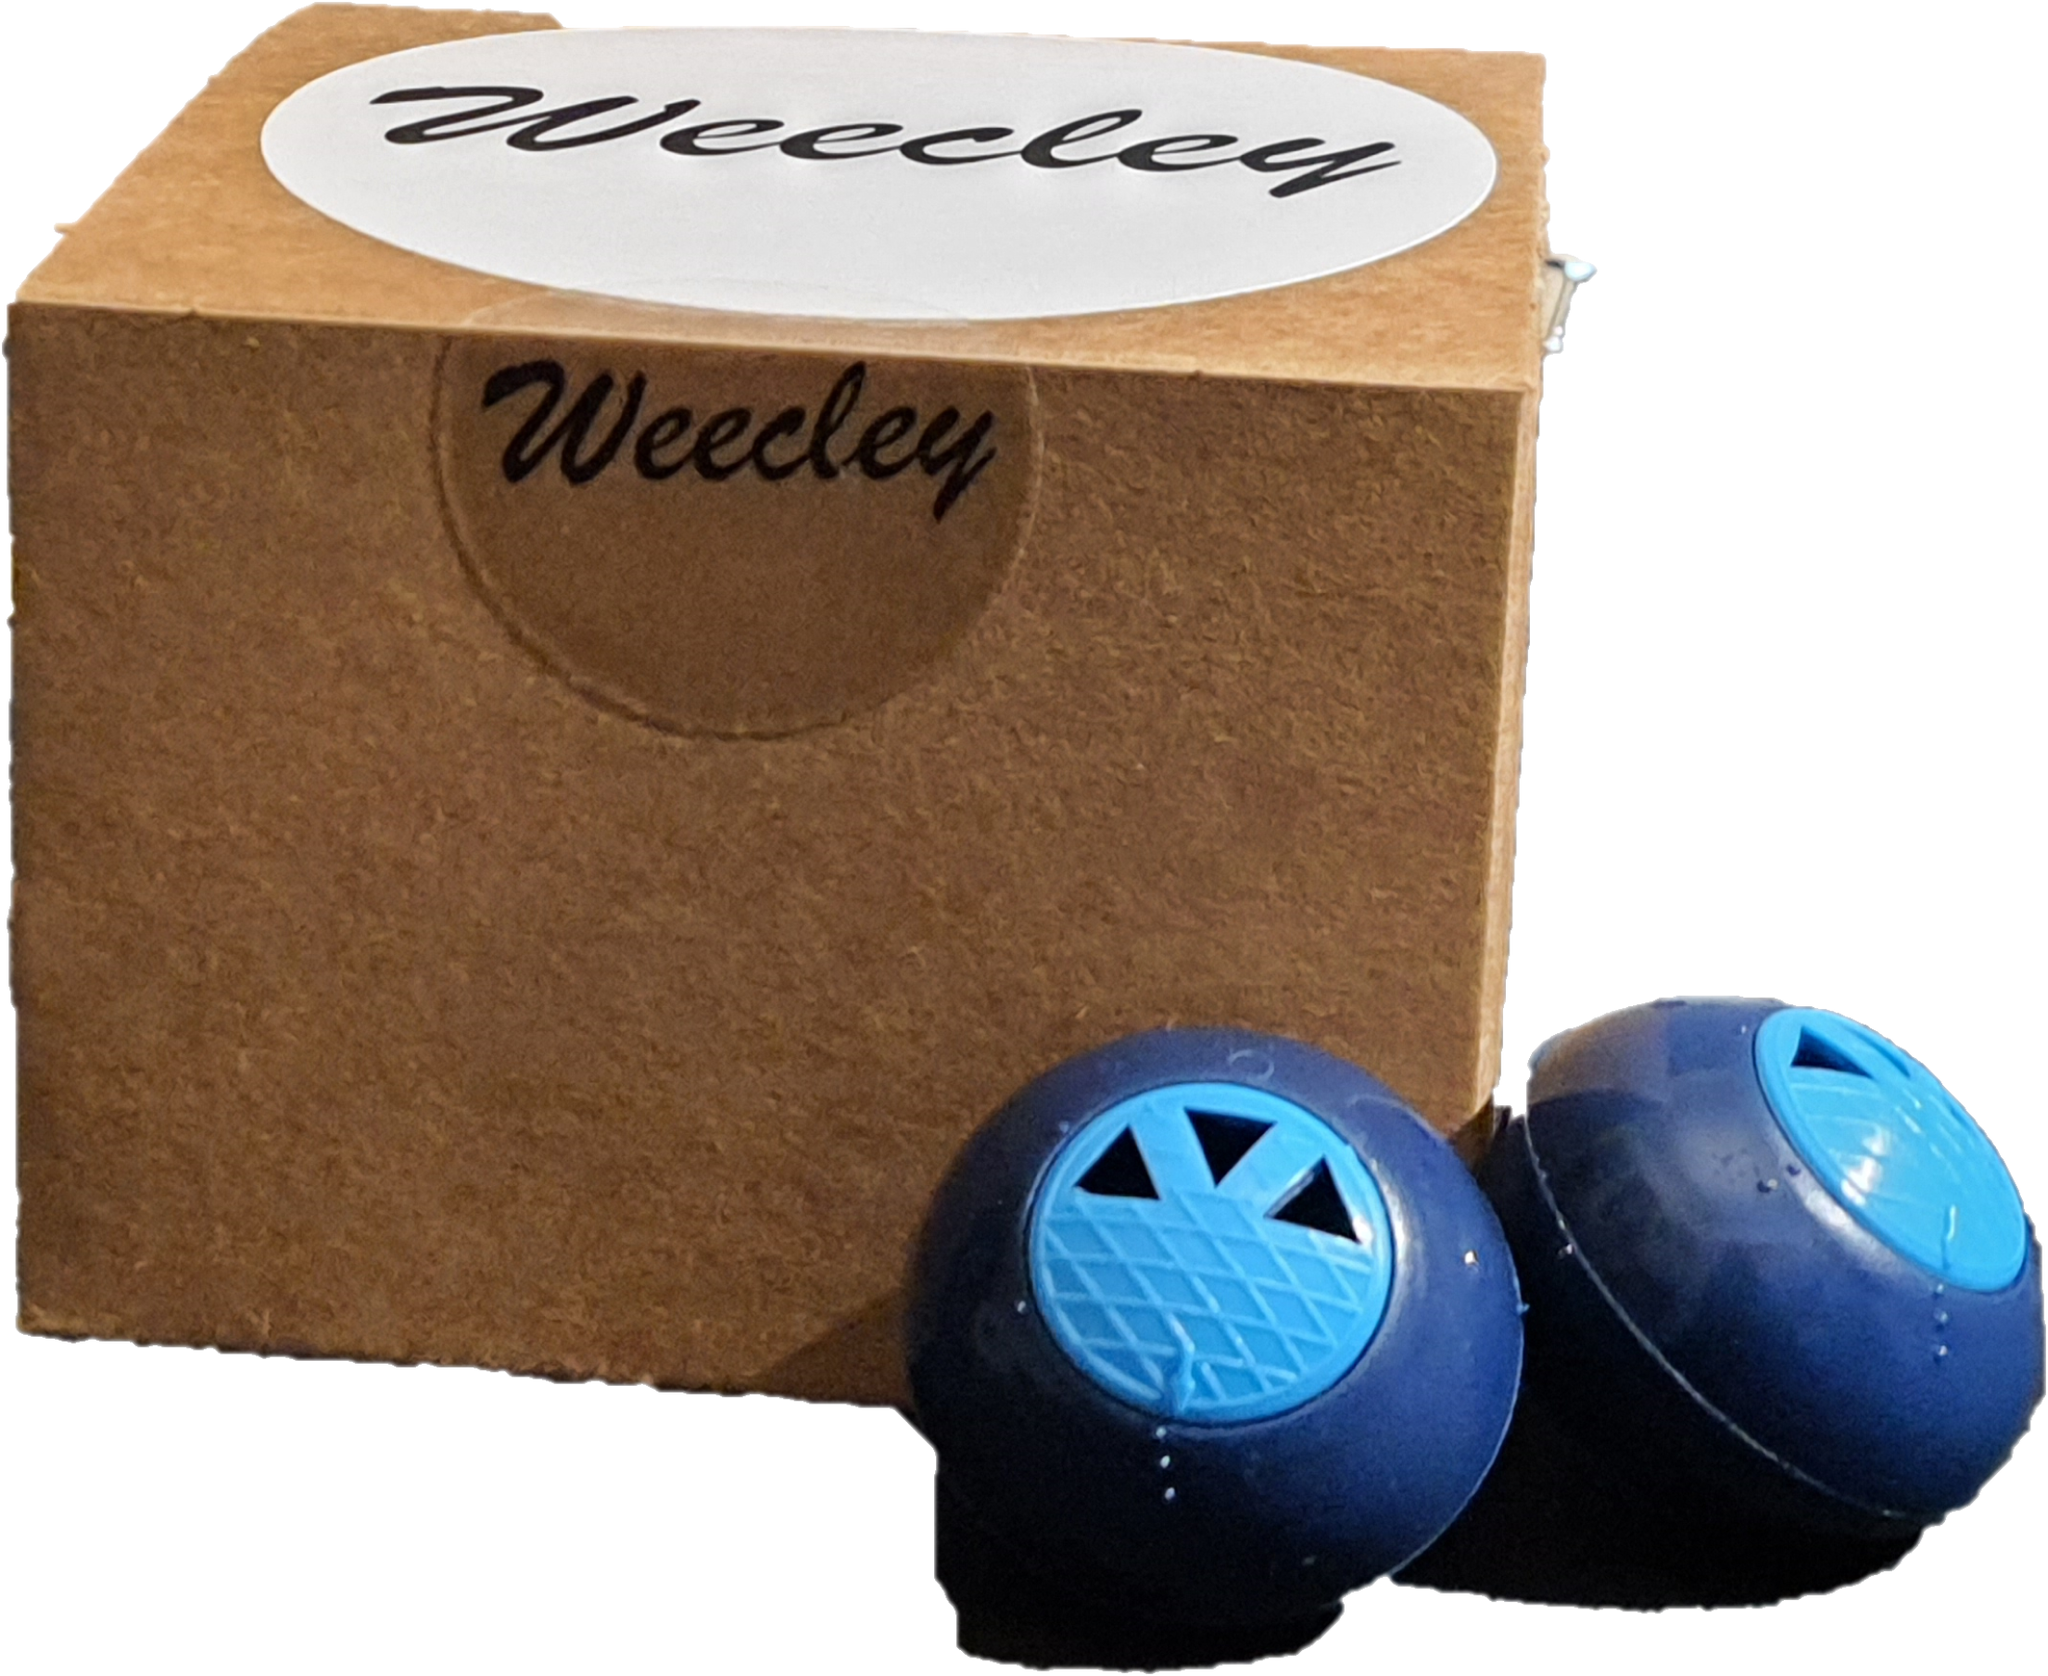 Weecley-product